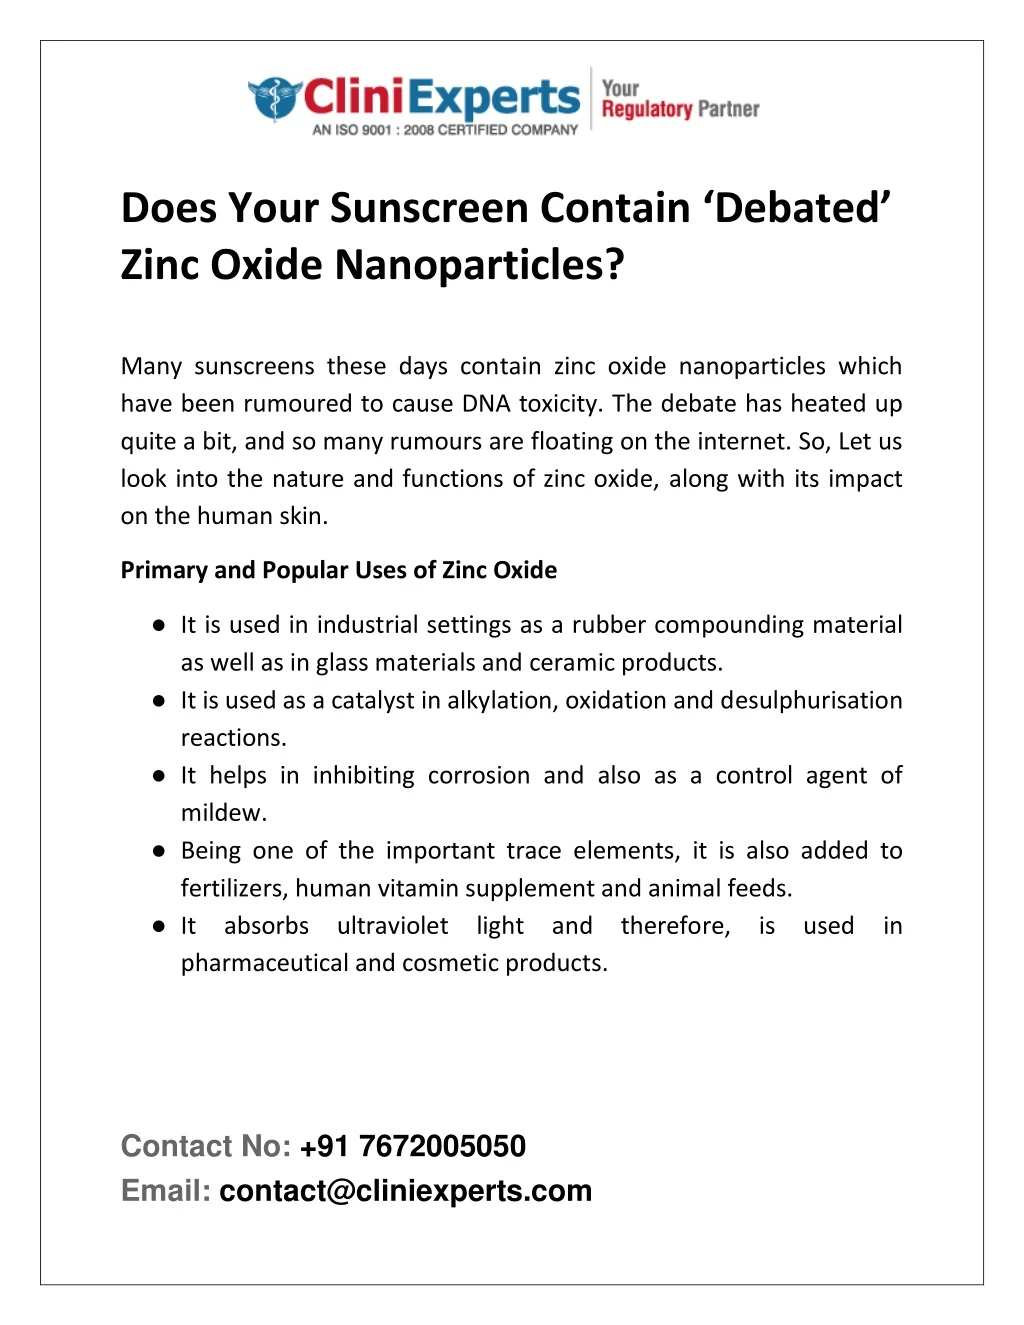 does your sunscreen contain debated zinc oxide